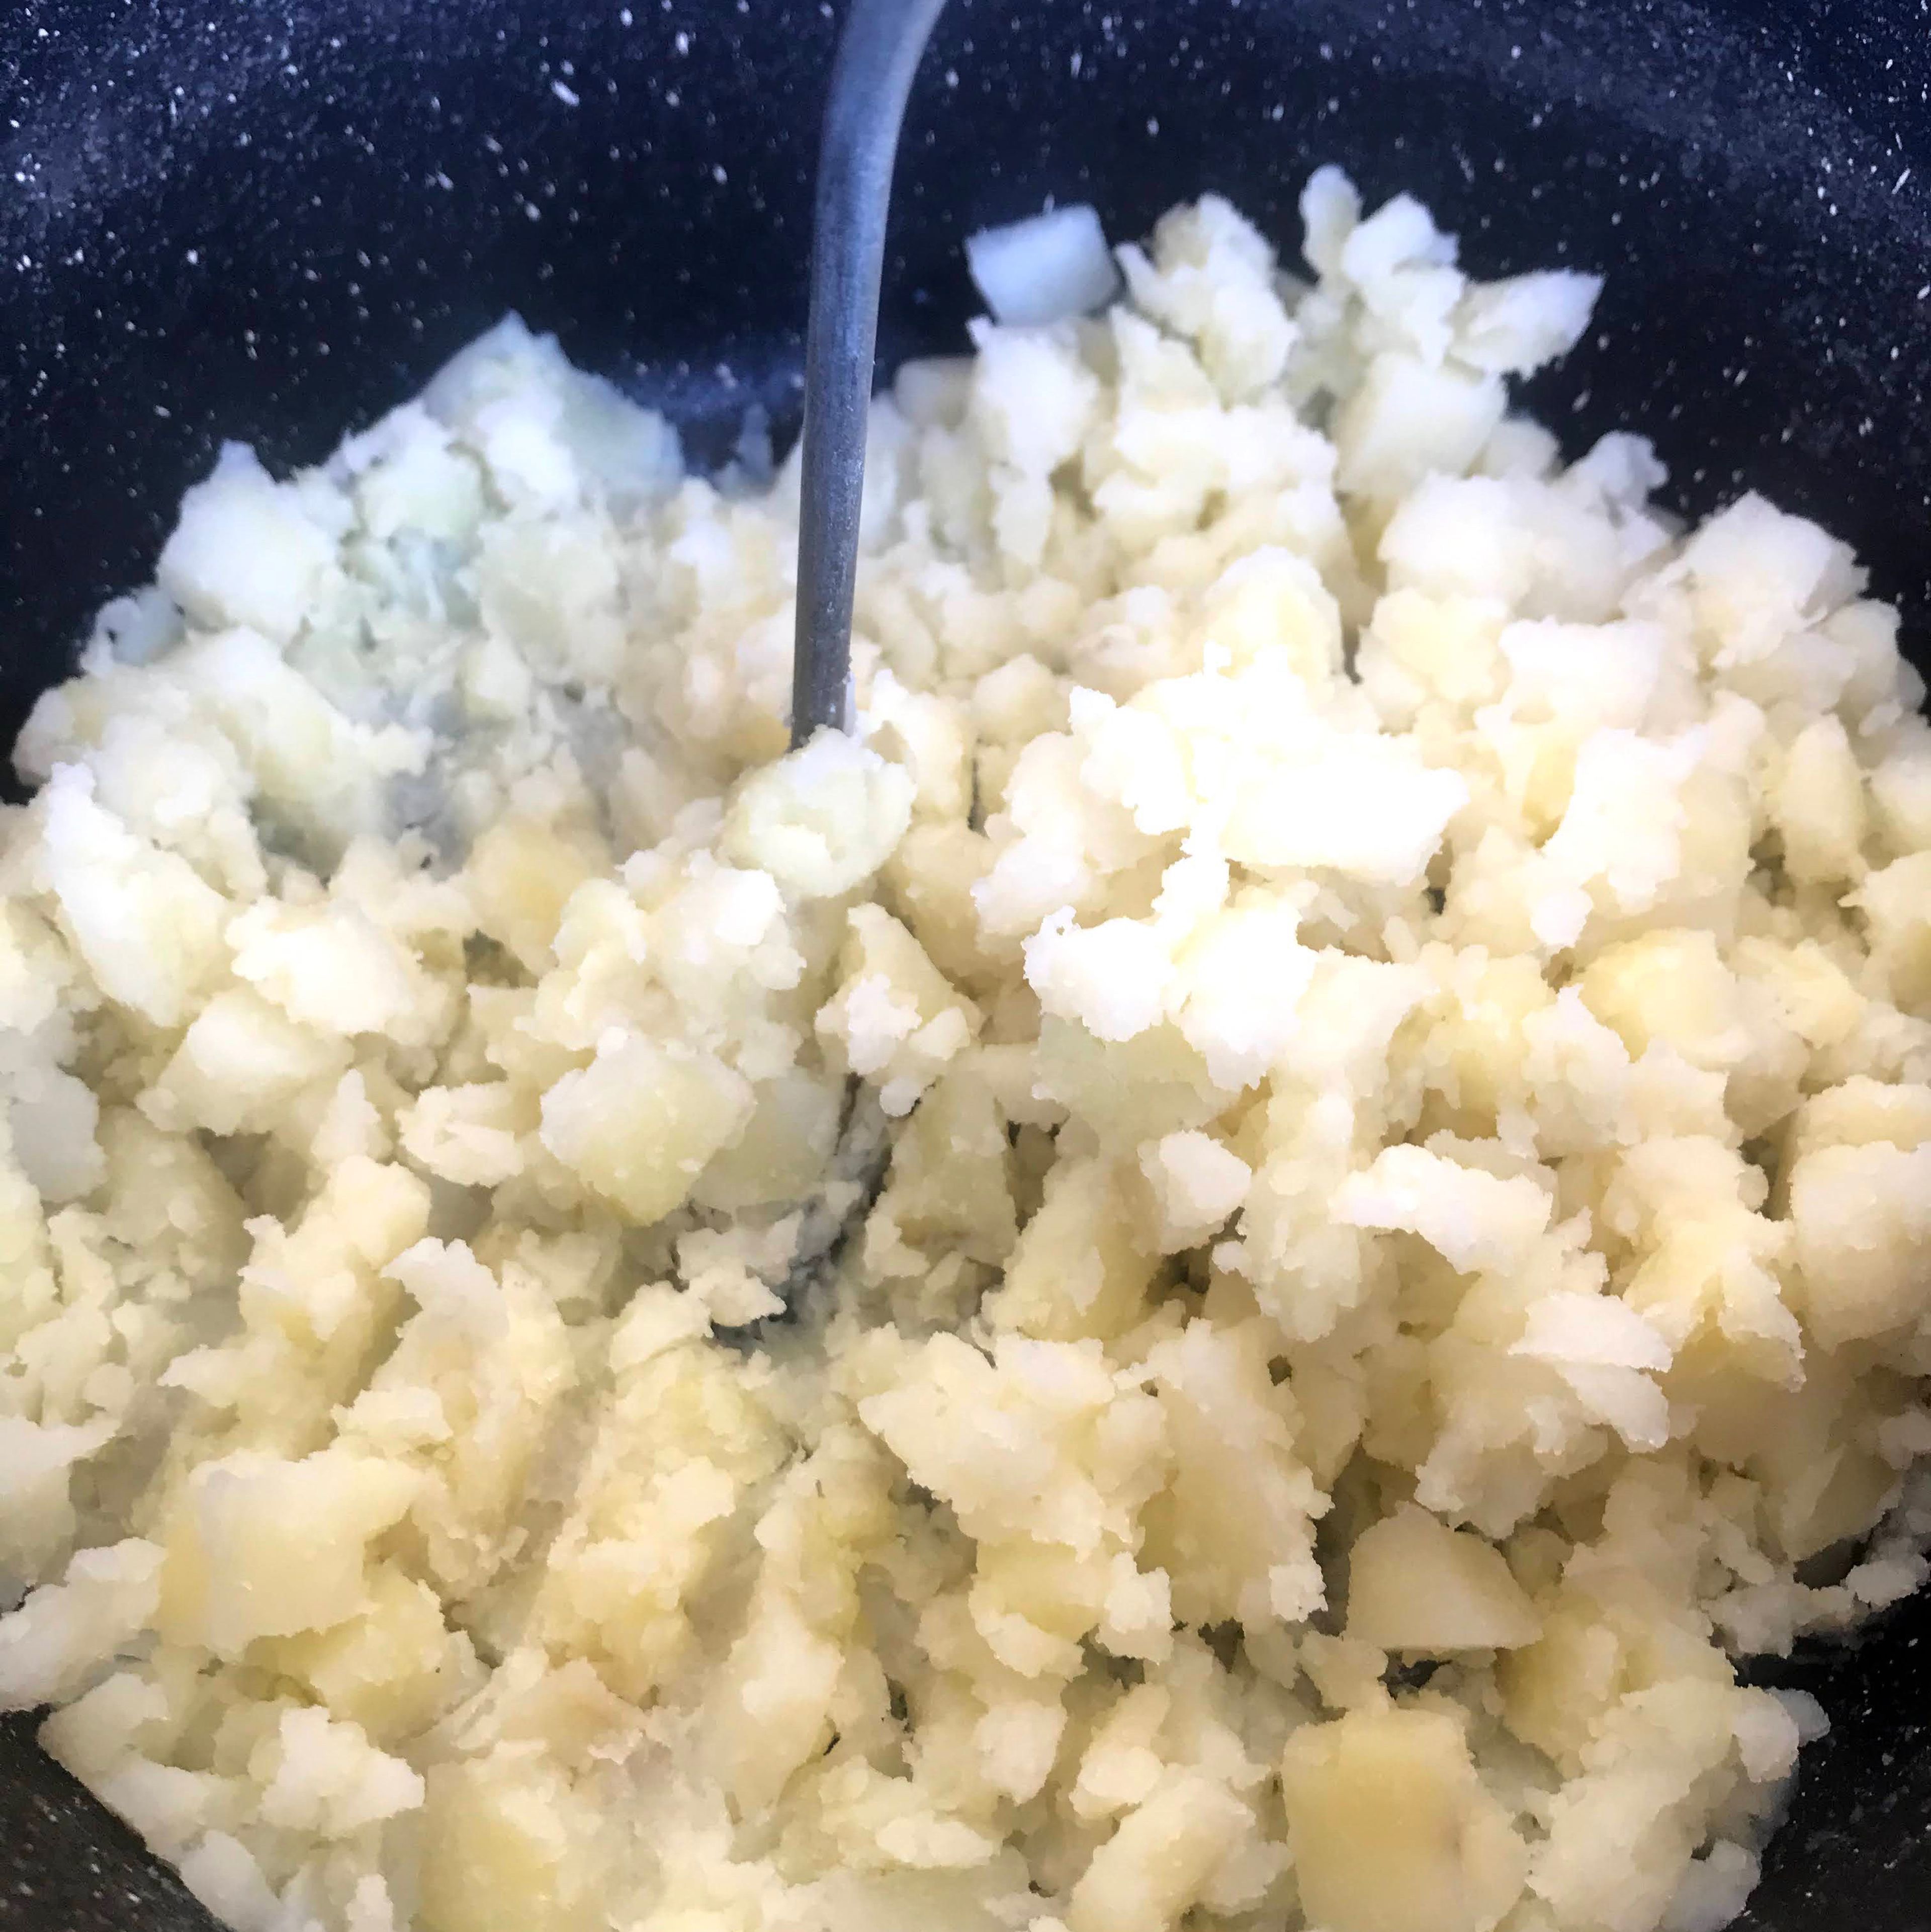 Drain the potatoes, add the milk and mash them until smooth.